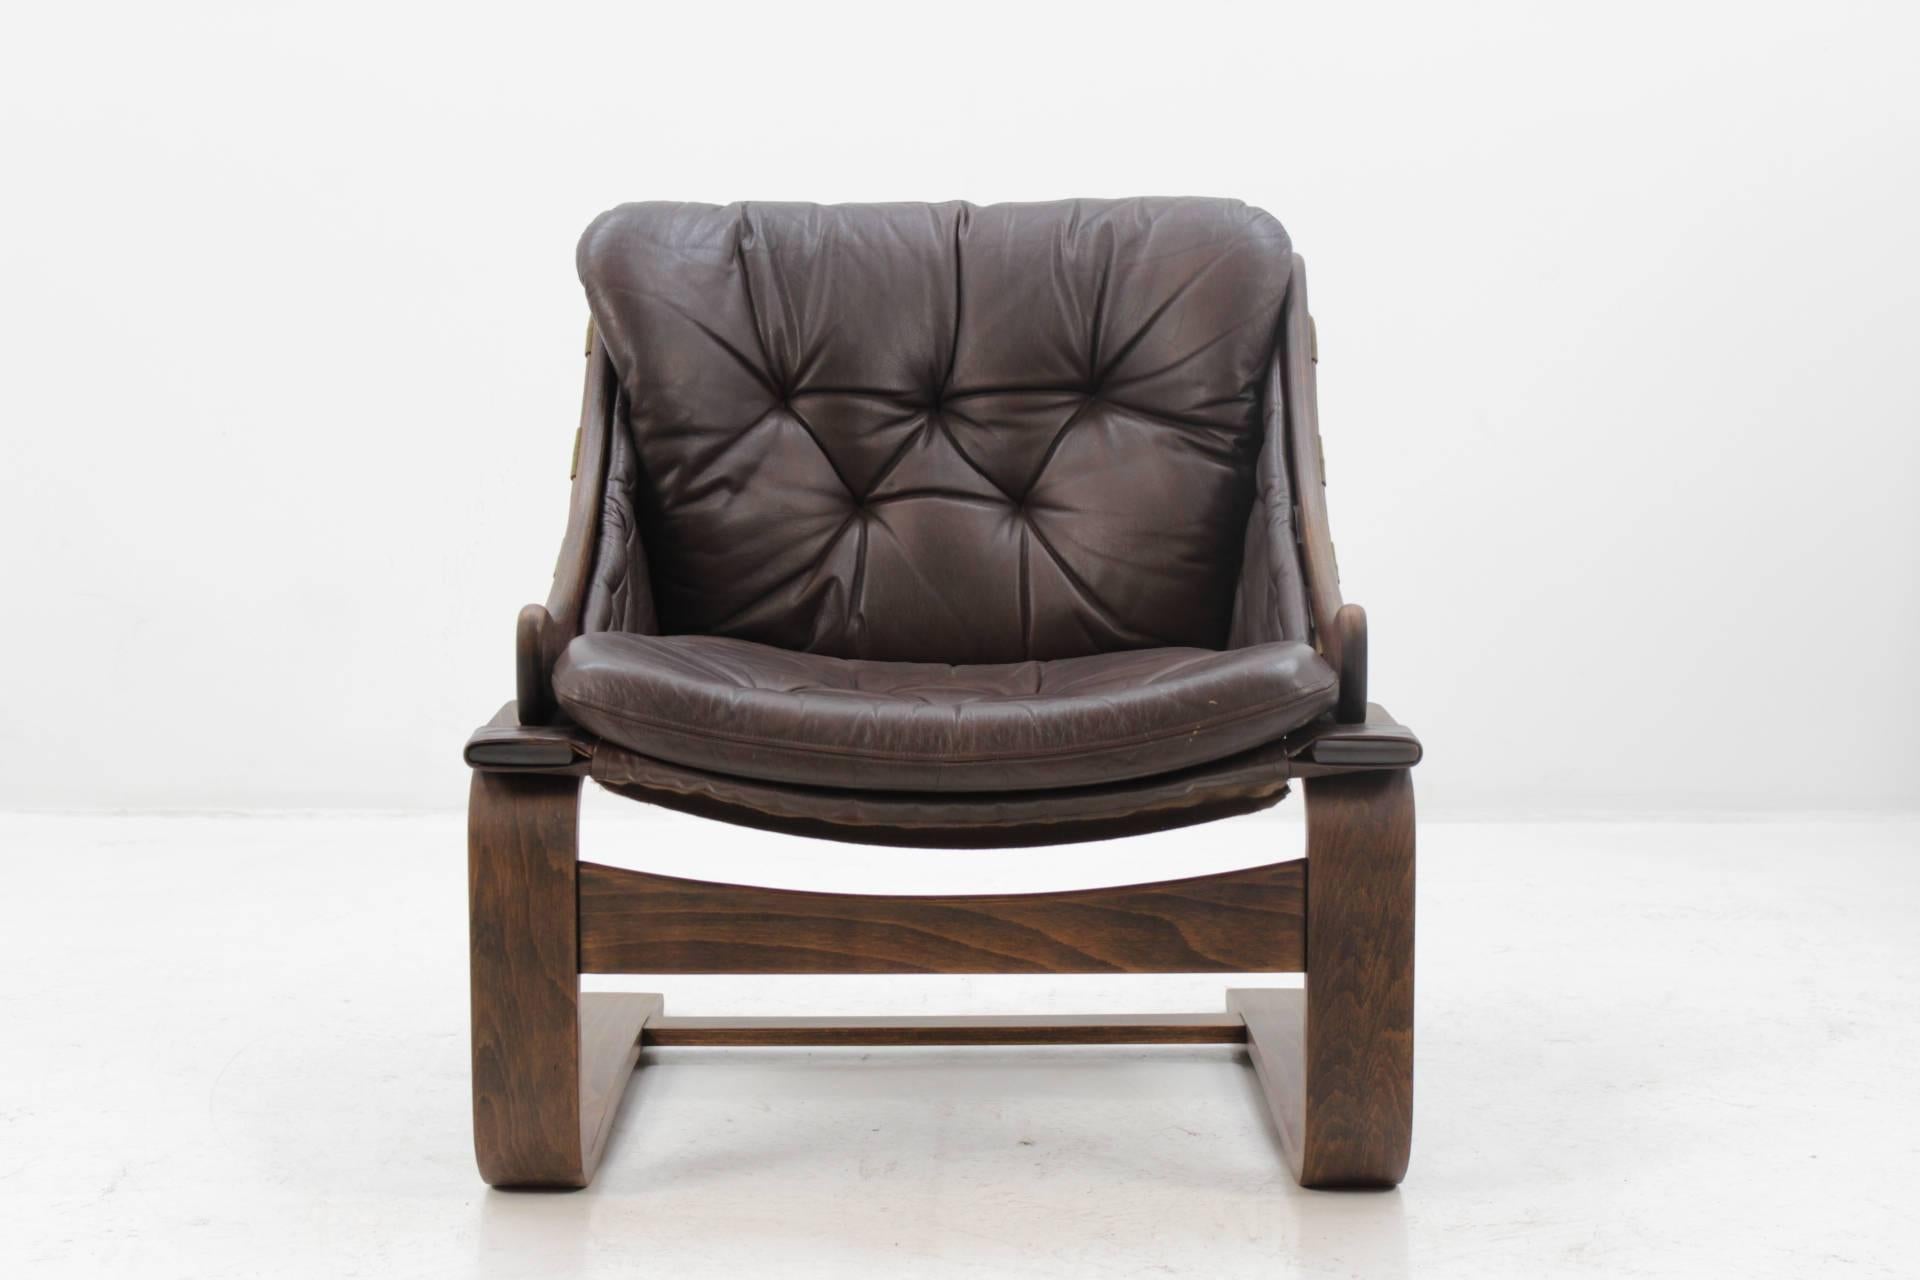 Mid-Century Modern 1970s Scandinavian Bentwood Leather Lounge chair by Ake Fribytter for Nelo Mobel